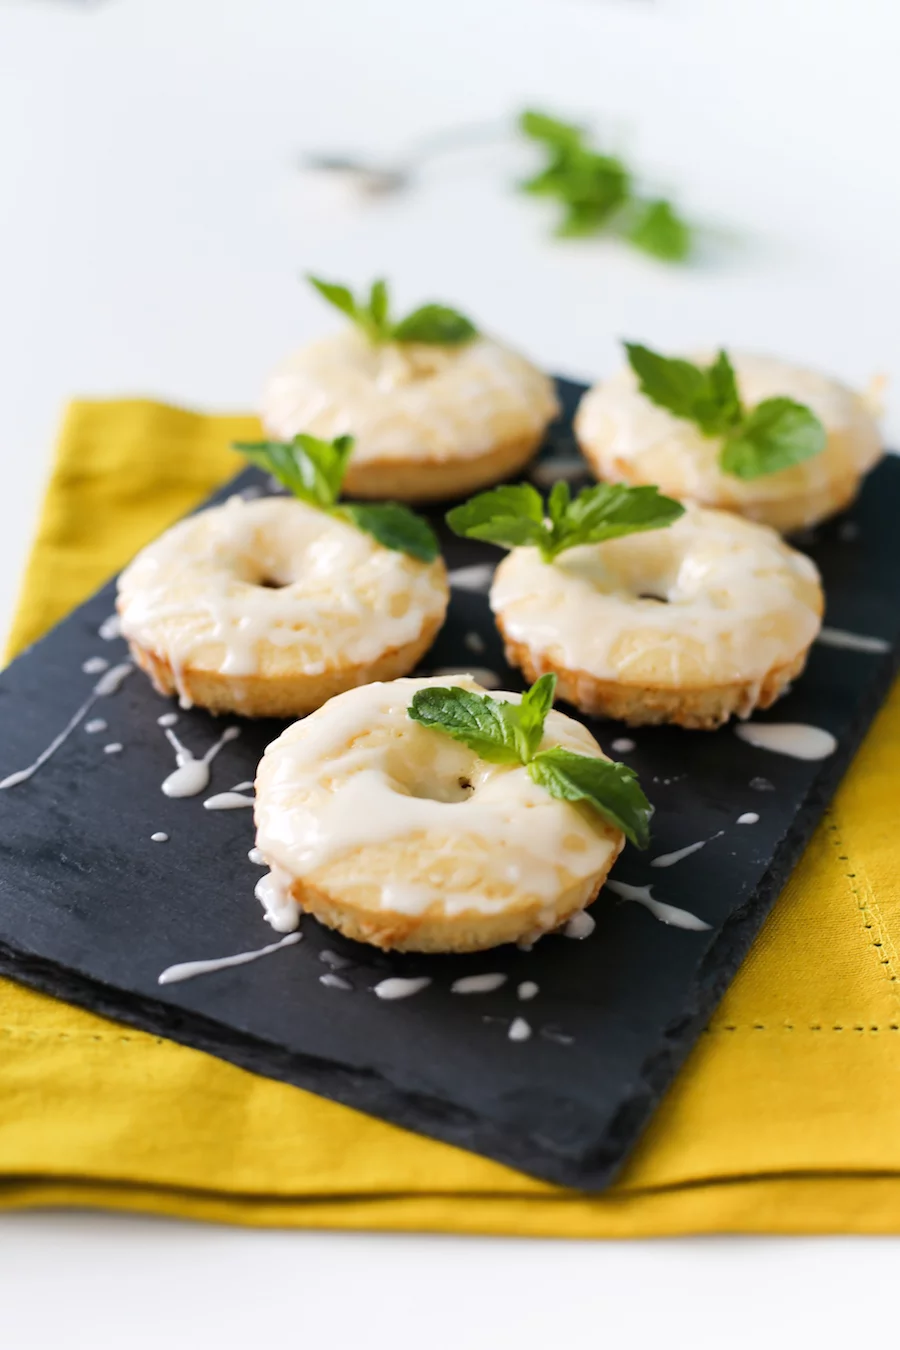 Celebrate the Kentucky Derby at home with these Mint Julep Donuts! A minty lemon baked donut with a delicious bourbon glaze! // saltycanary.com